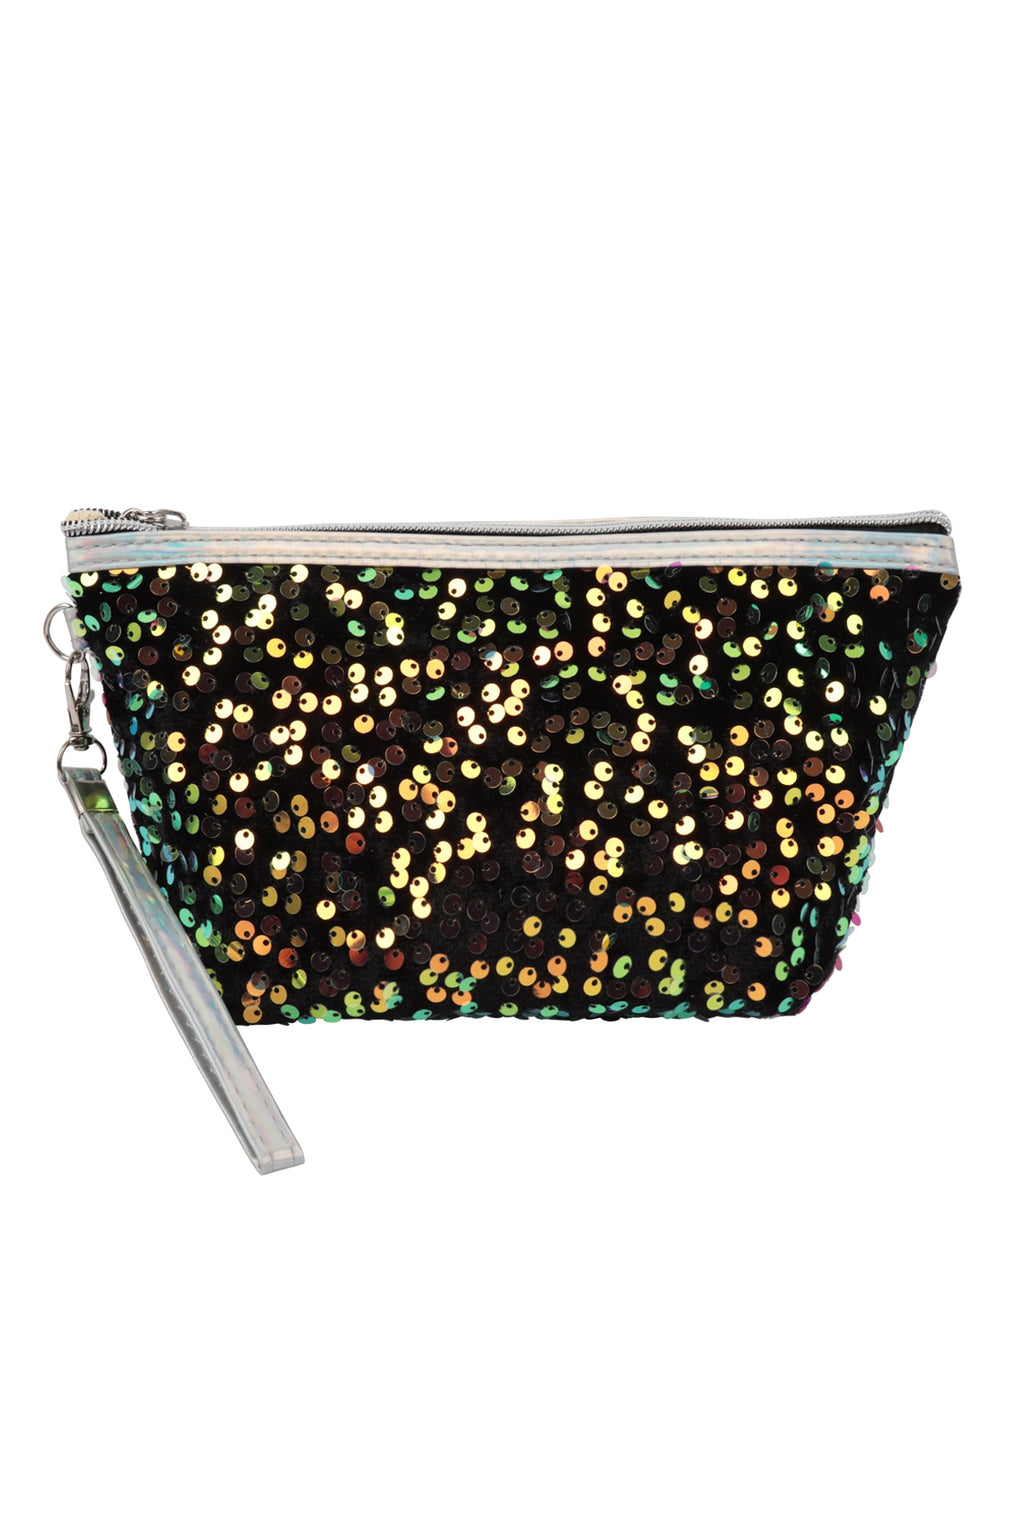 Sequin Glitter Cosmetic Pouch Black - Pack of 6